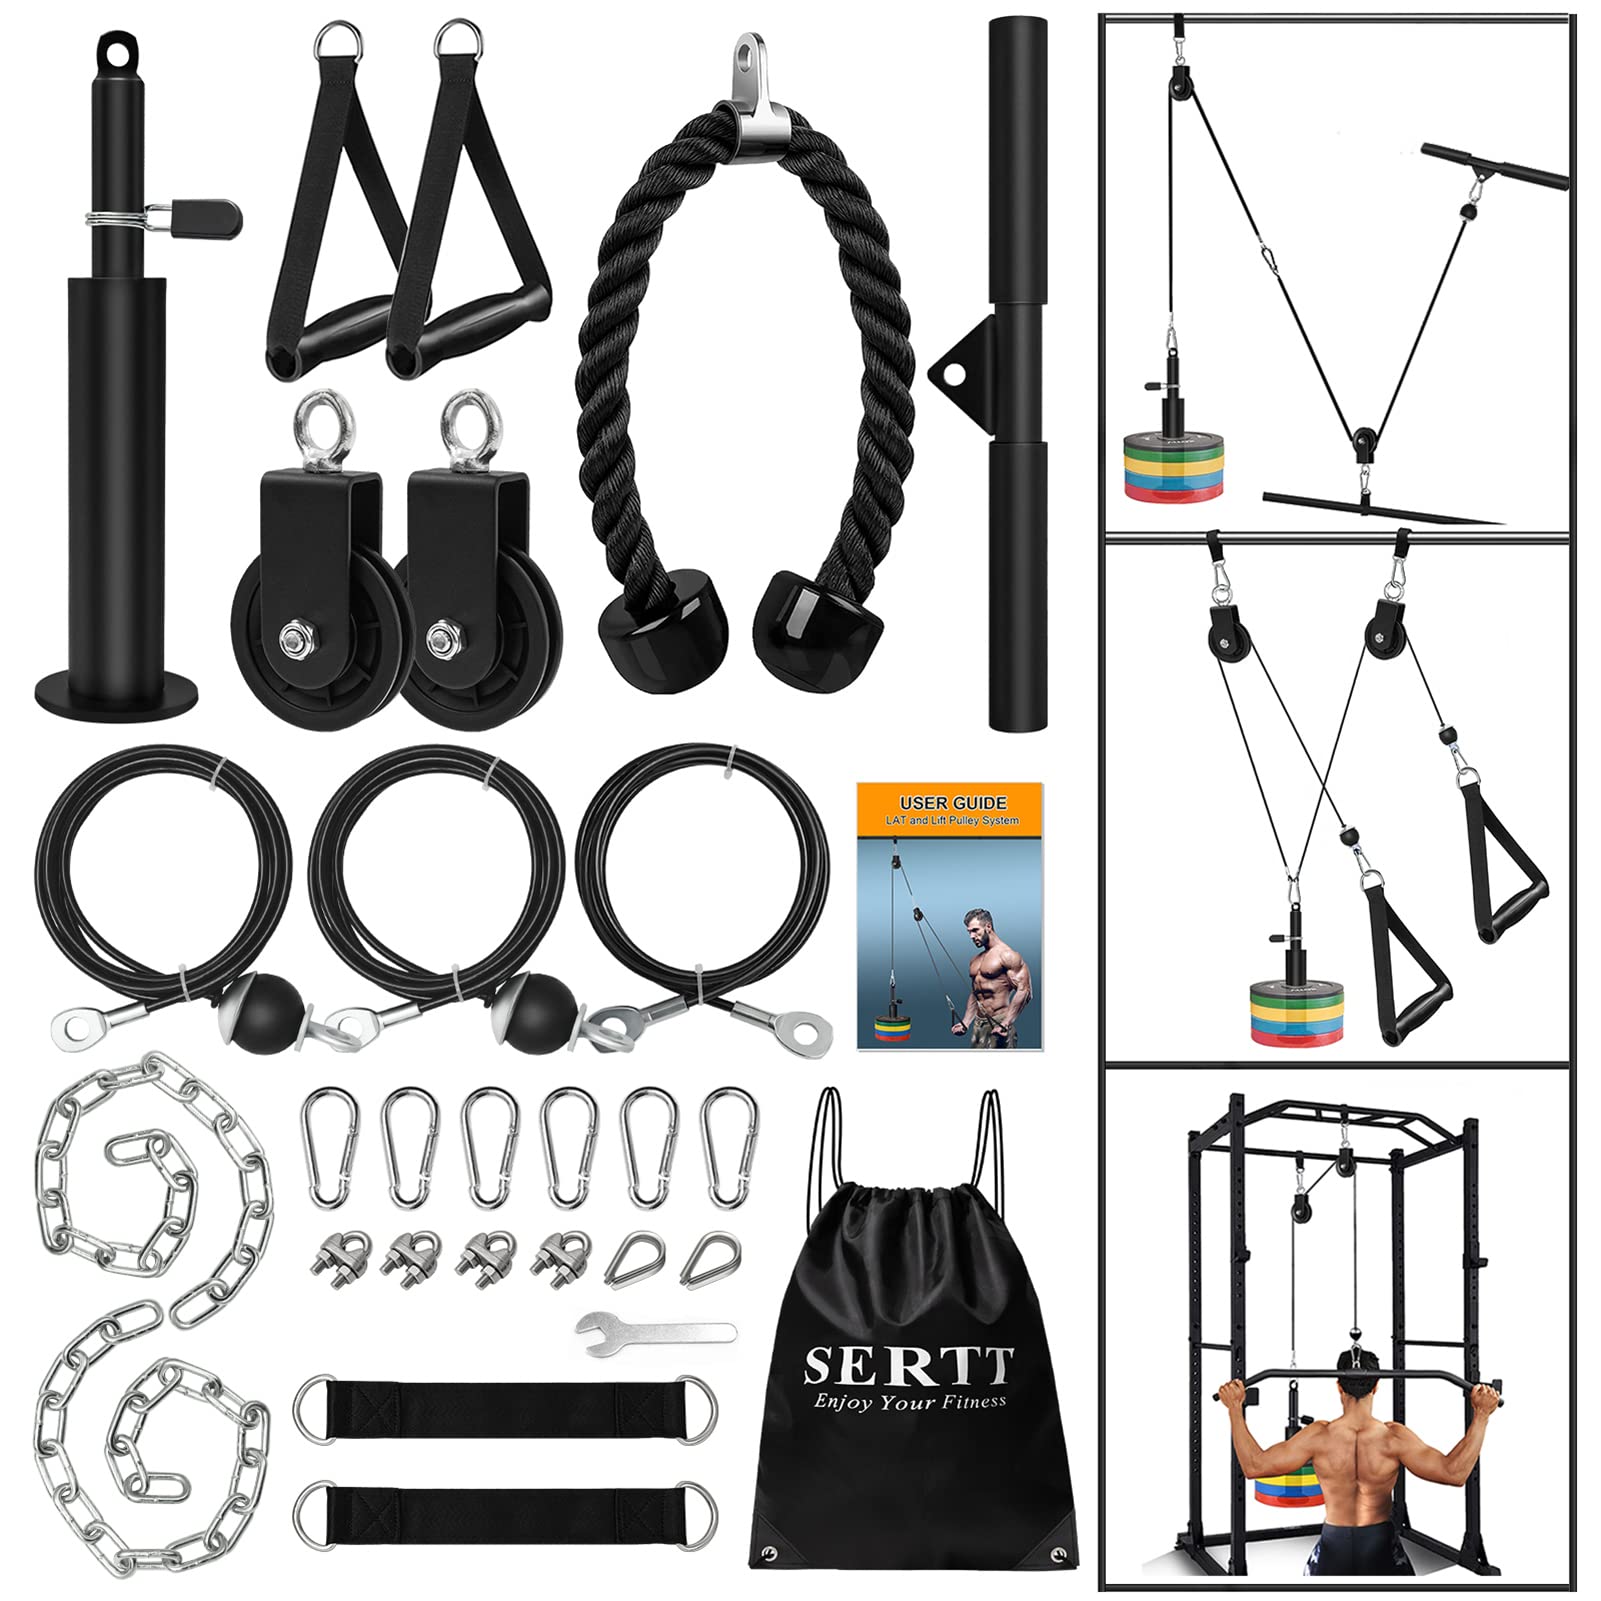 SERTT Weight cable Pulley System gym, SERTT Upgraded cable Pulley Attachments for gym LAT Pull Down, Biceps curl, Tricep, Arm Workouts